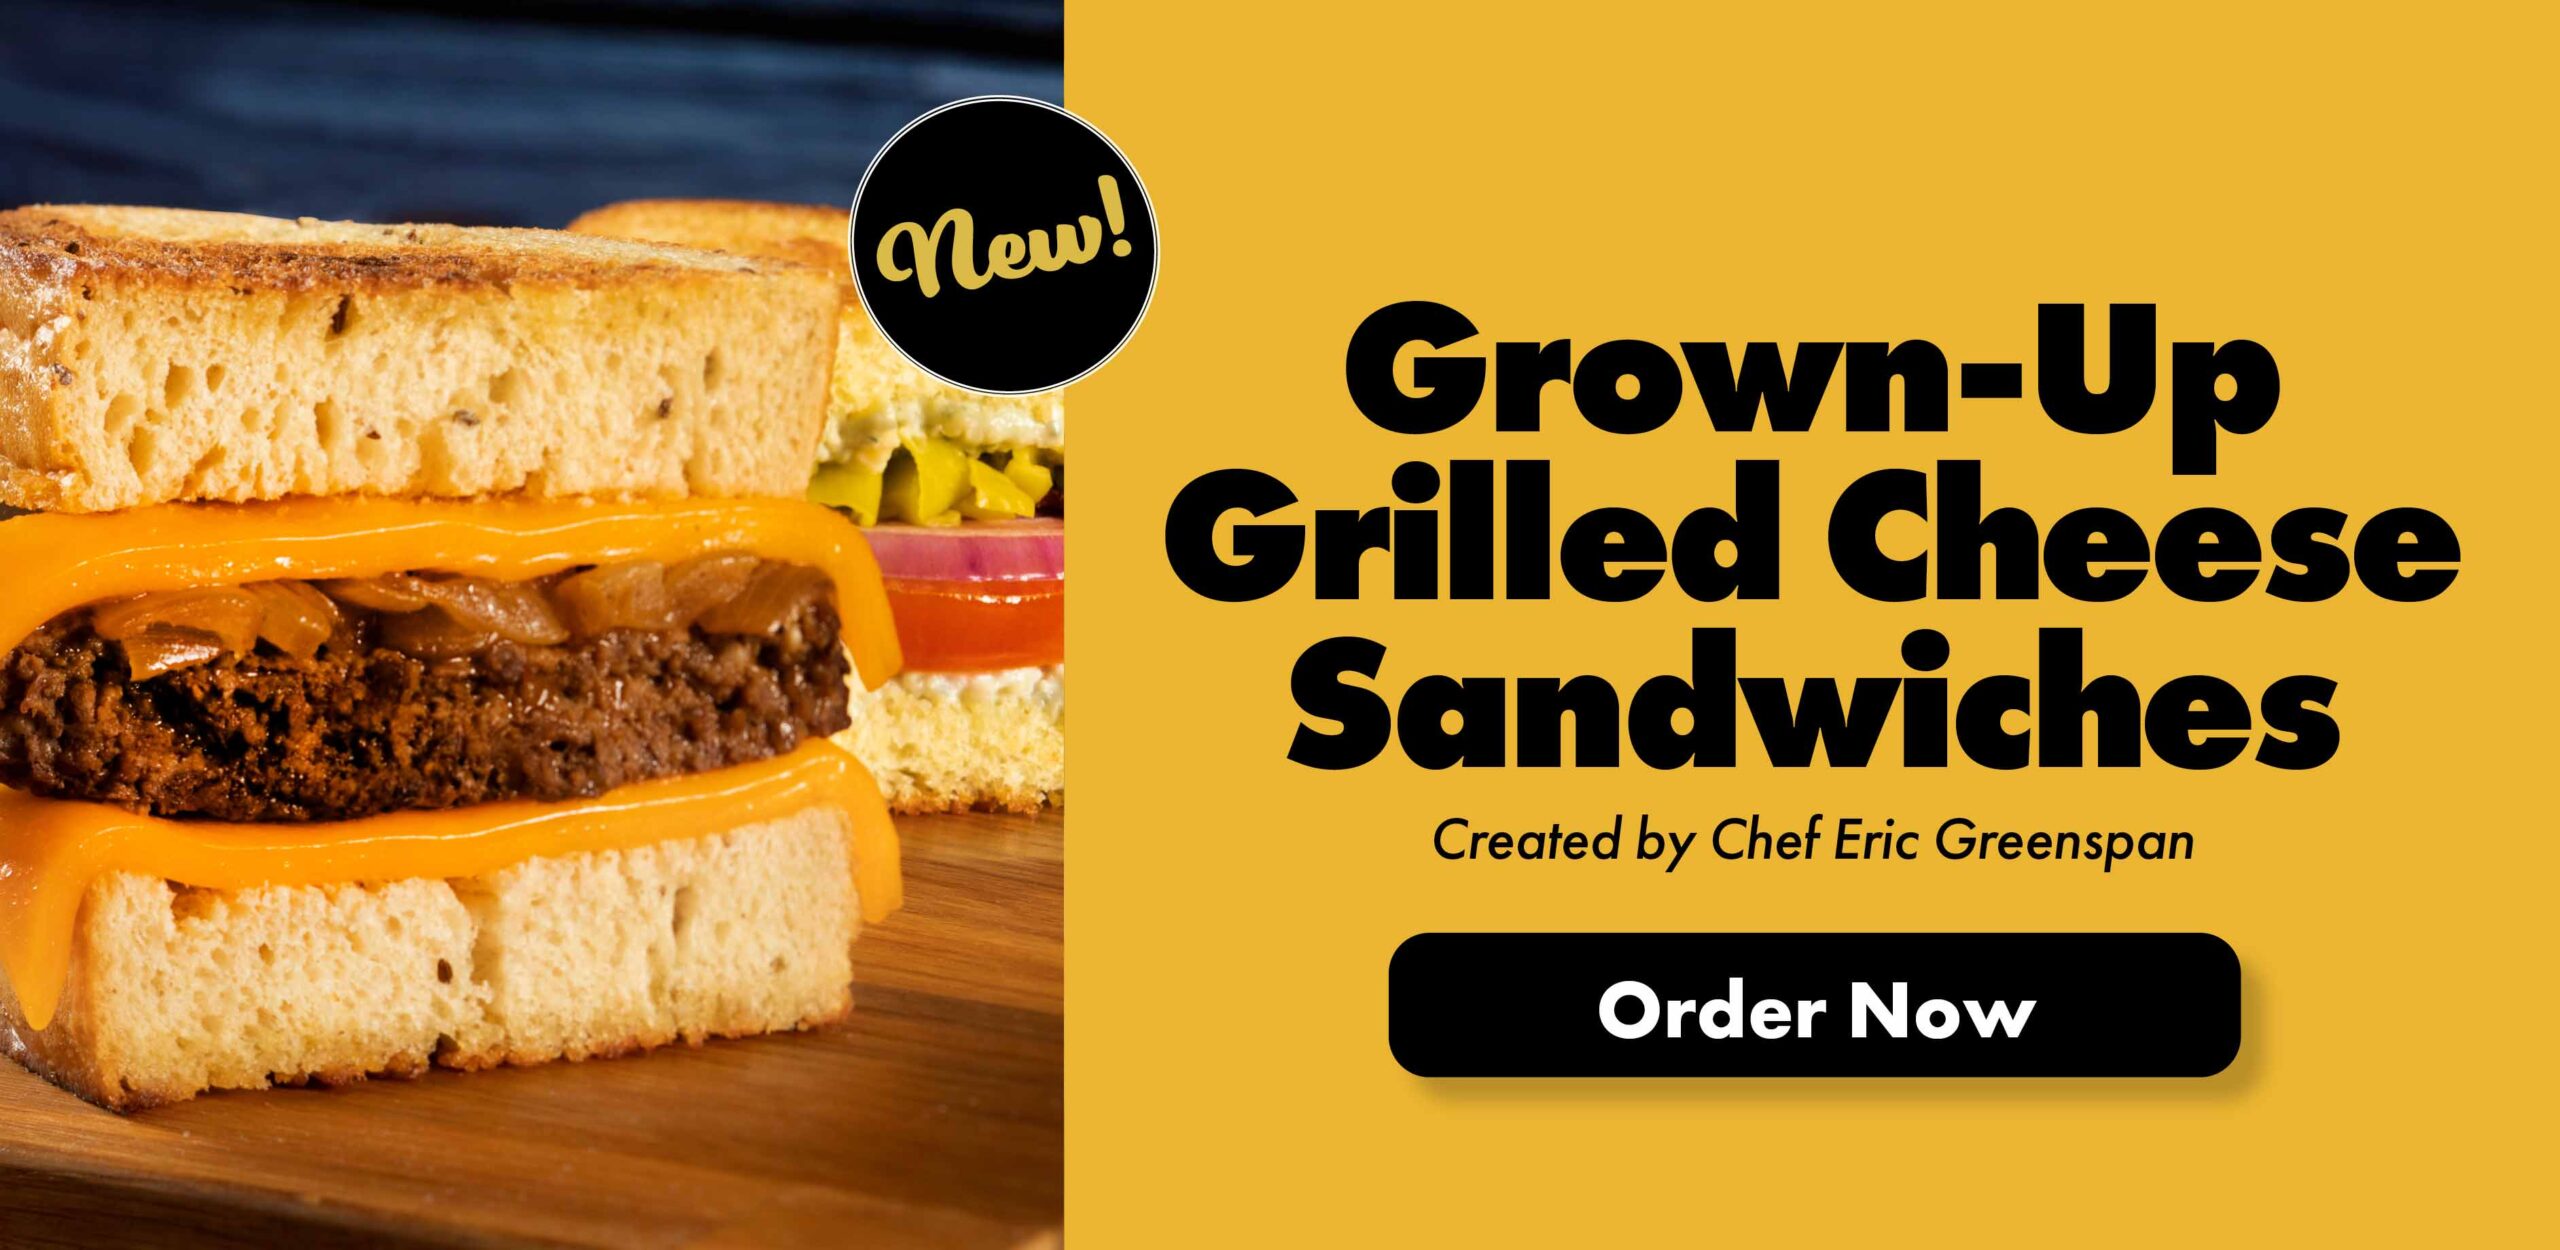 Grown-up grilled cheese sandwiches created by Chef Eric Greenspan